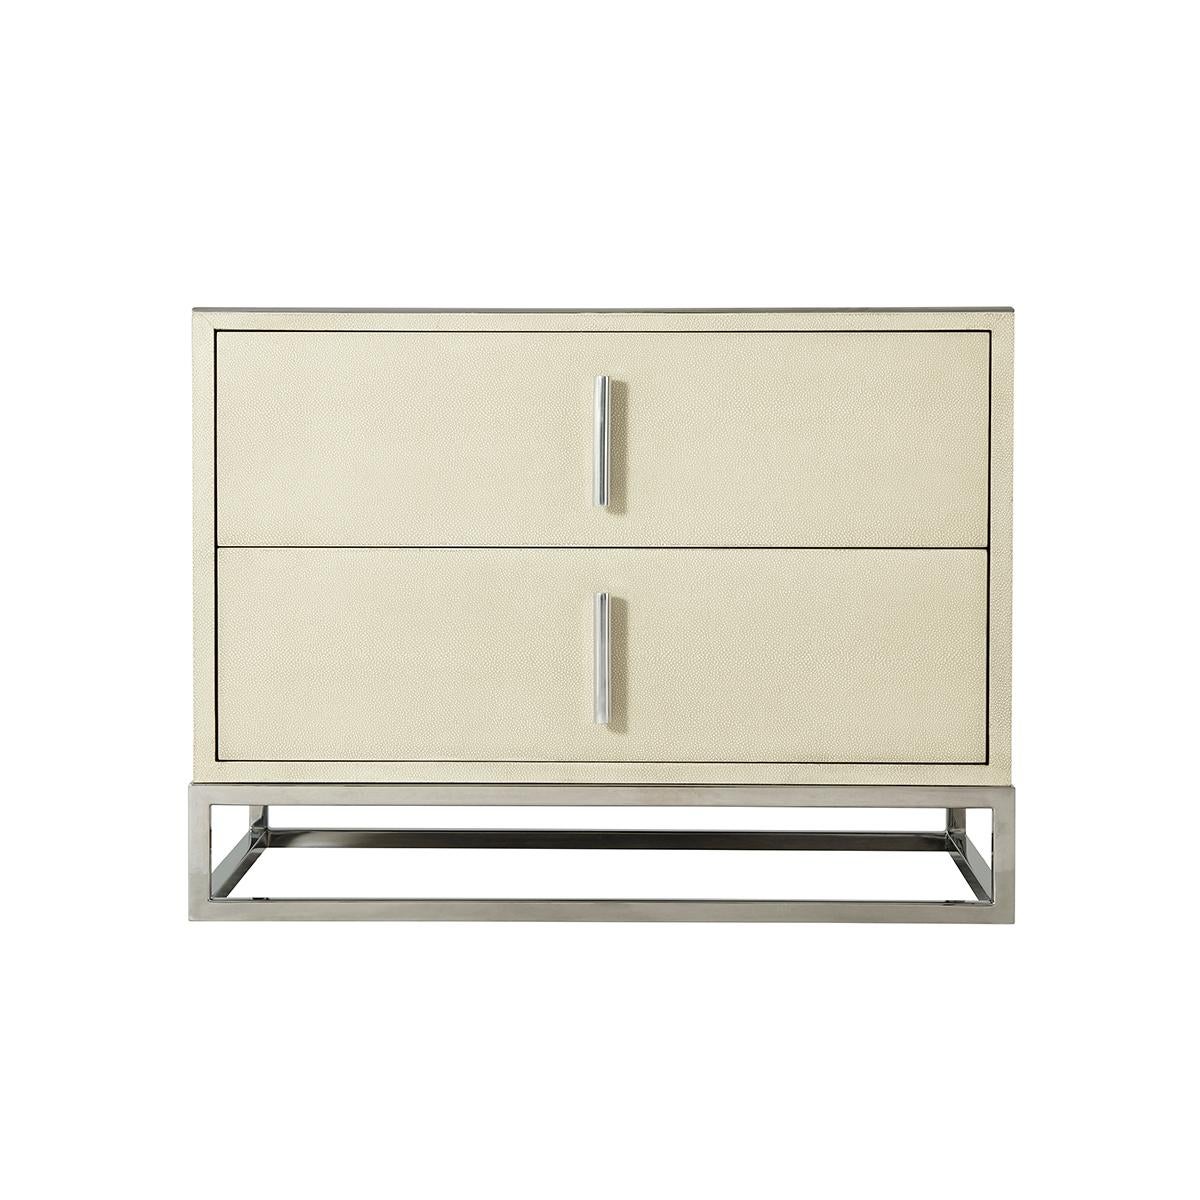 Modern leather nightstand with two drawers, a shagreen embossed light overcast finish leather and polished nickel finish hardware and an open cube base.

Dimensions: 29.5